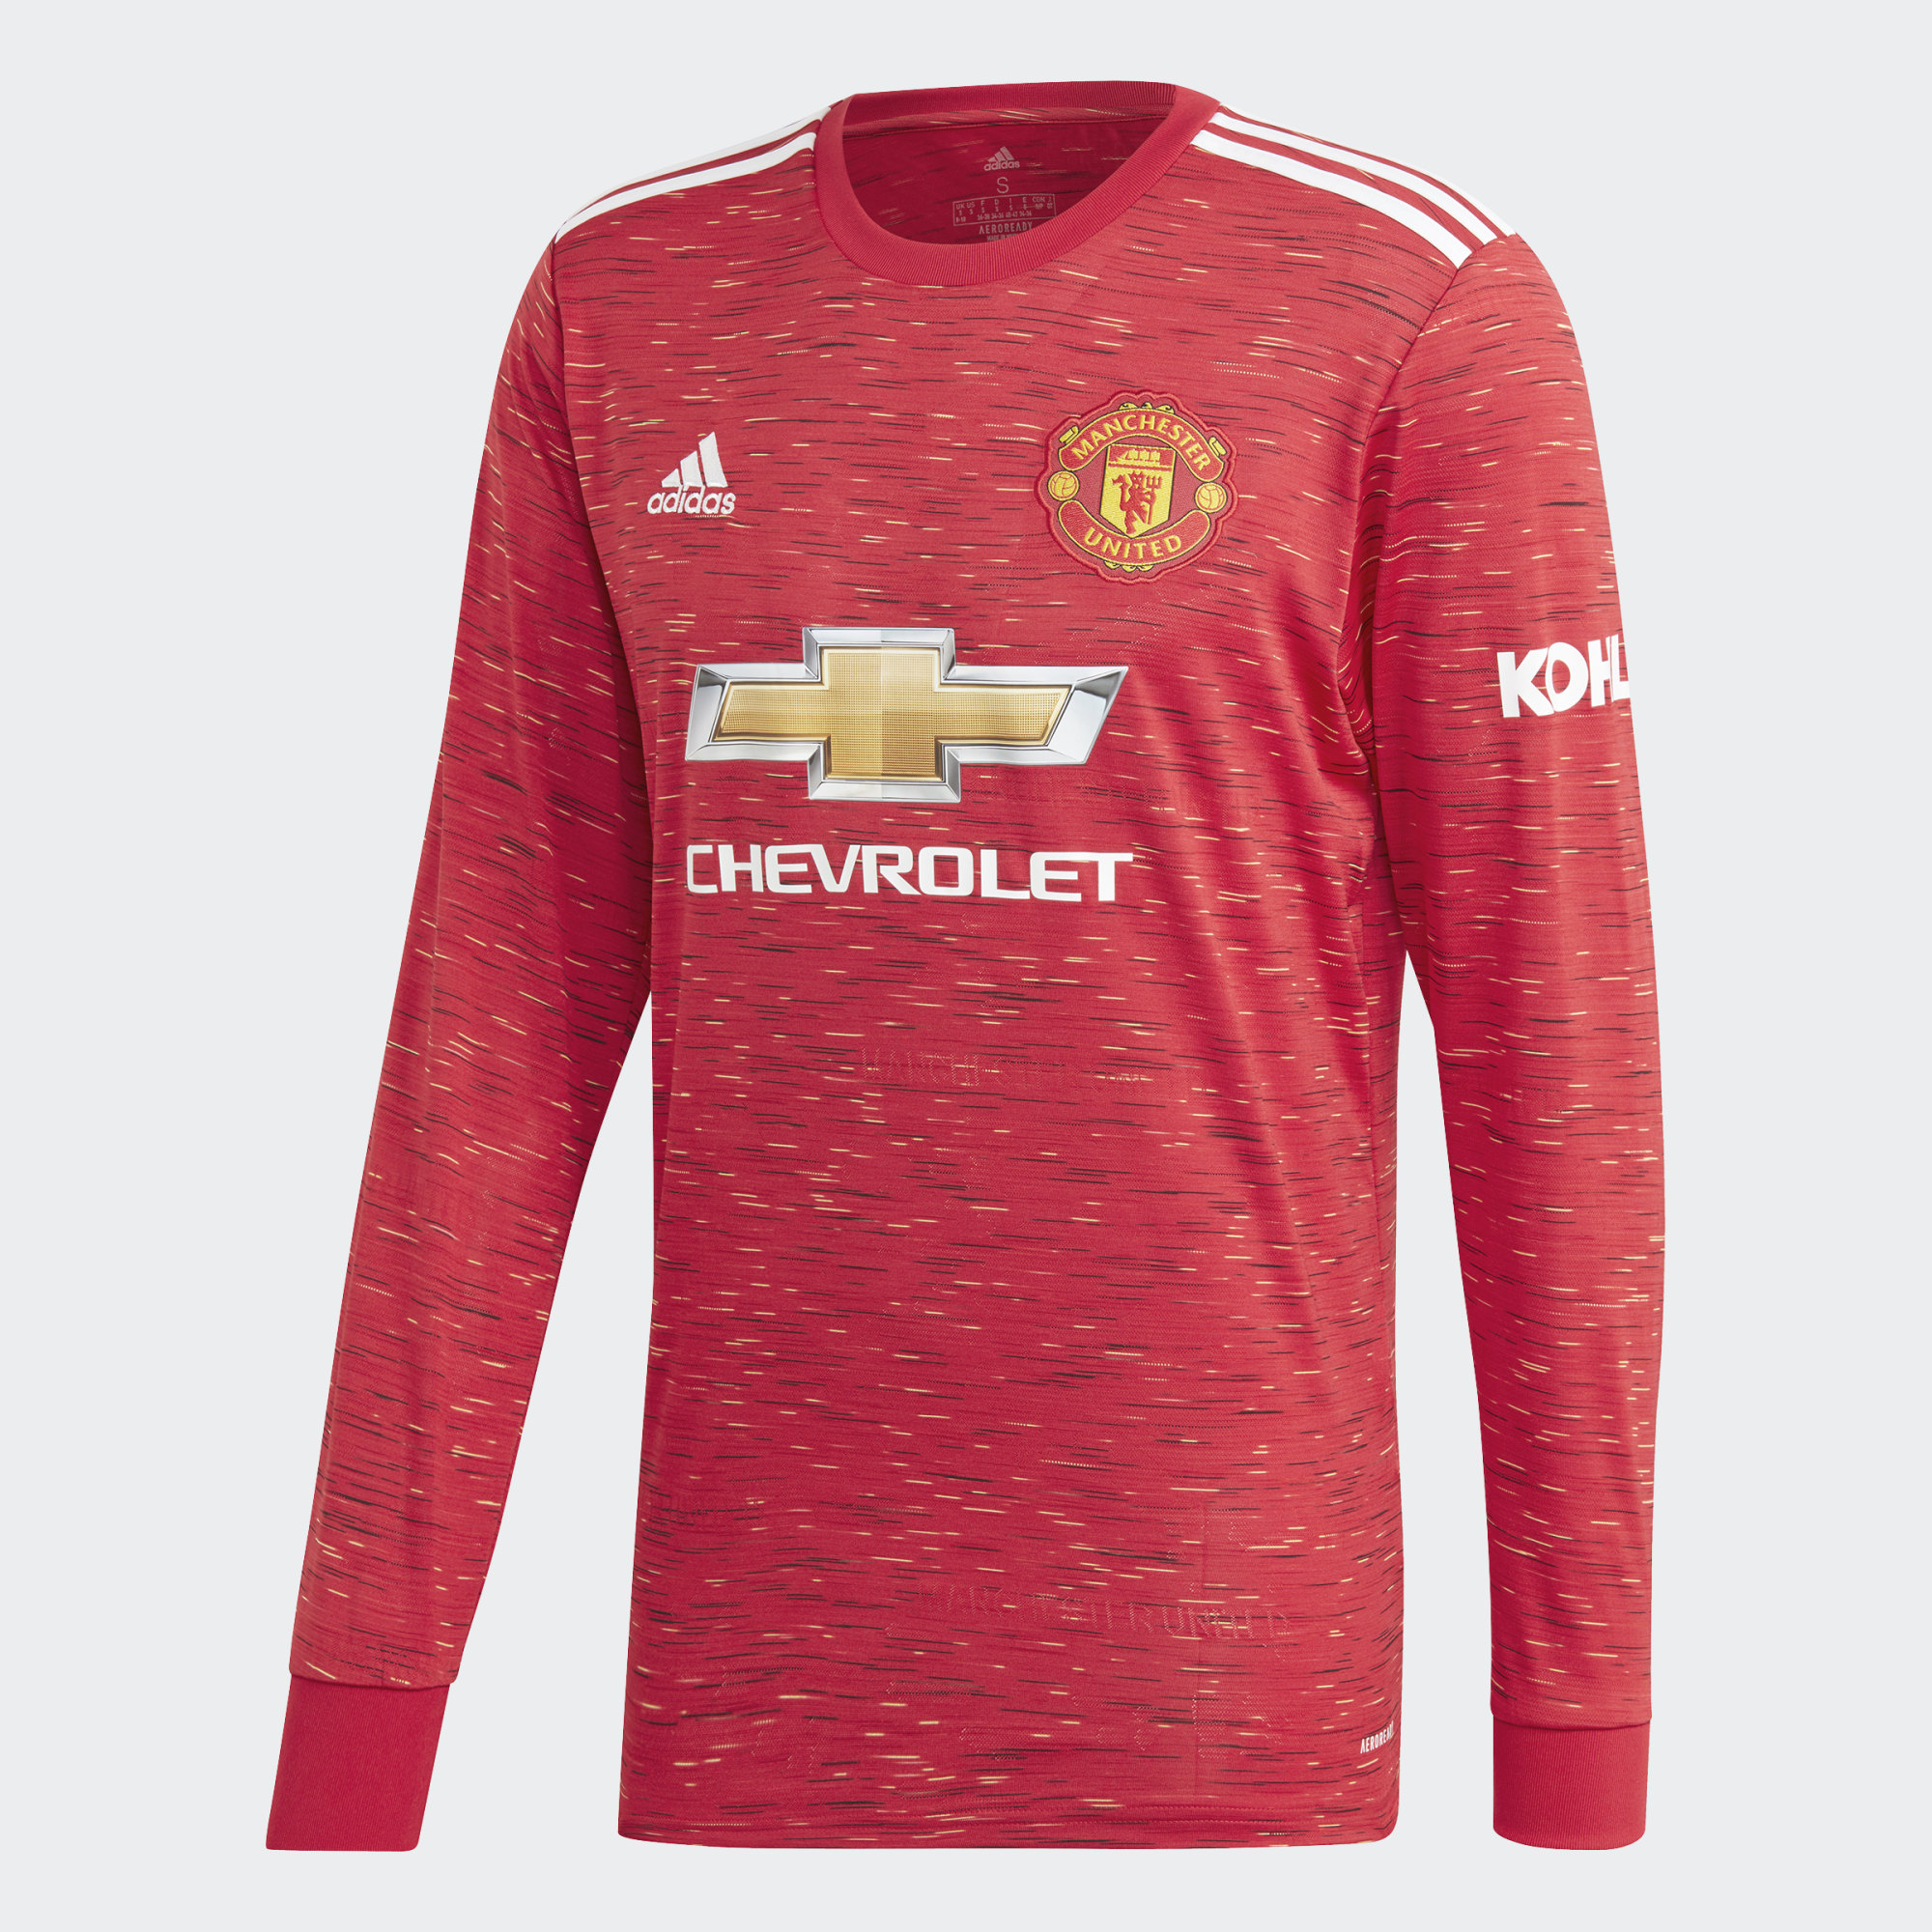 TFC Football - ADIDAS MANCHESTER UNITED 20/21 HOME LONG SLEEVE JERSEY